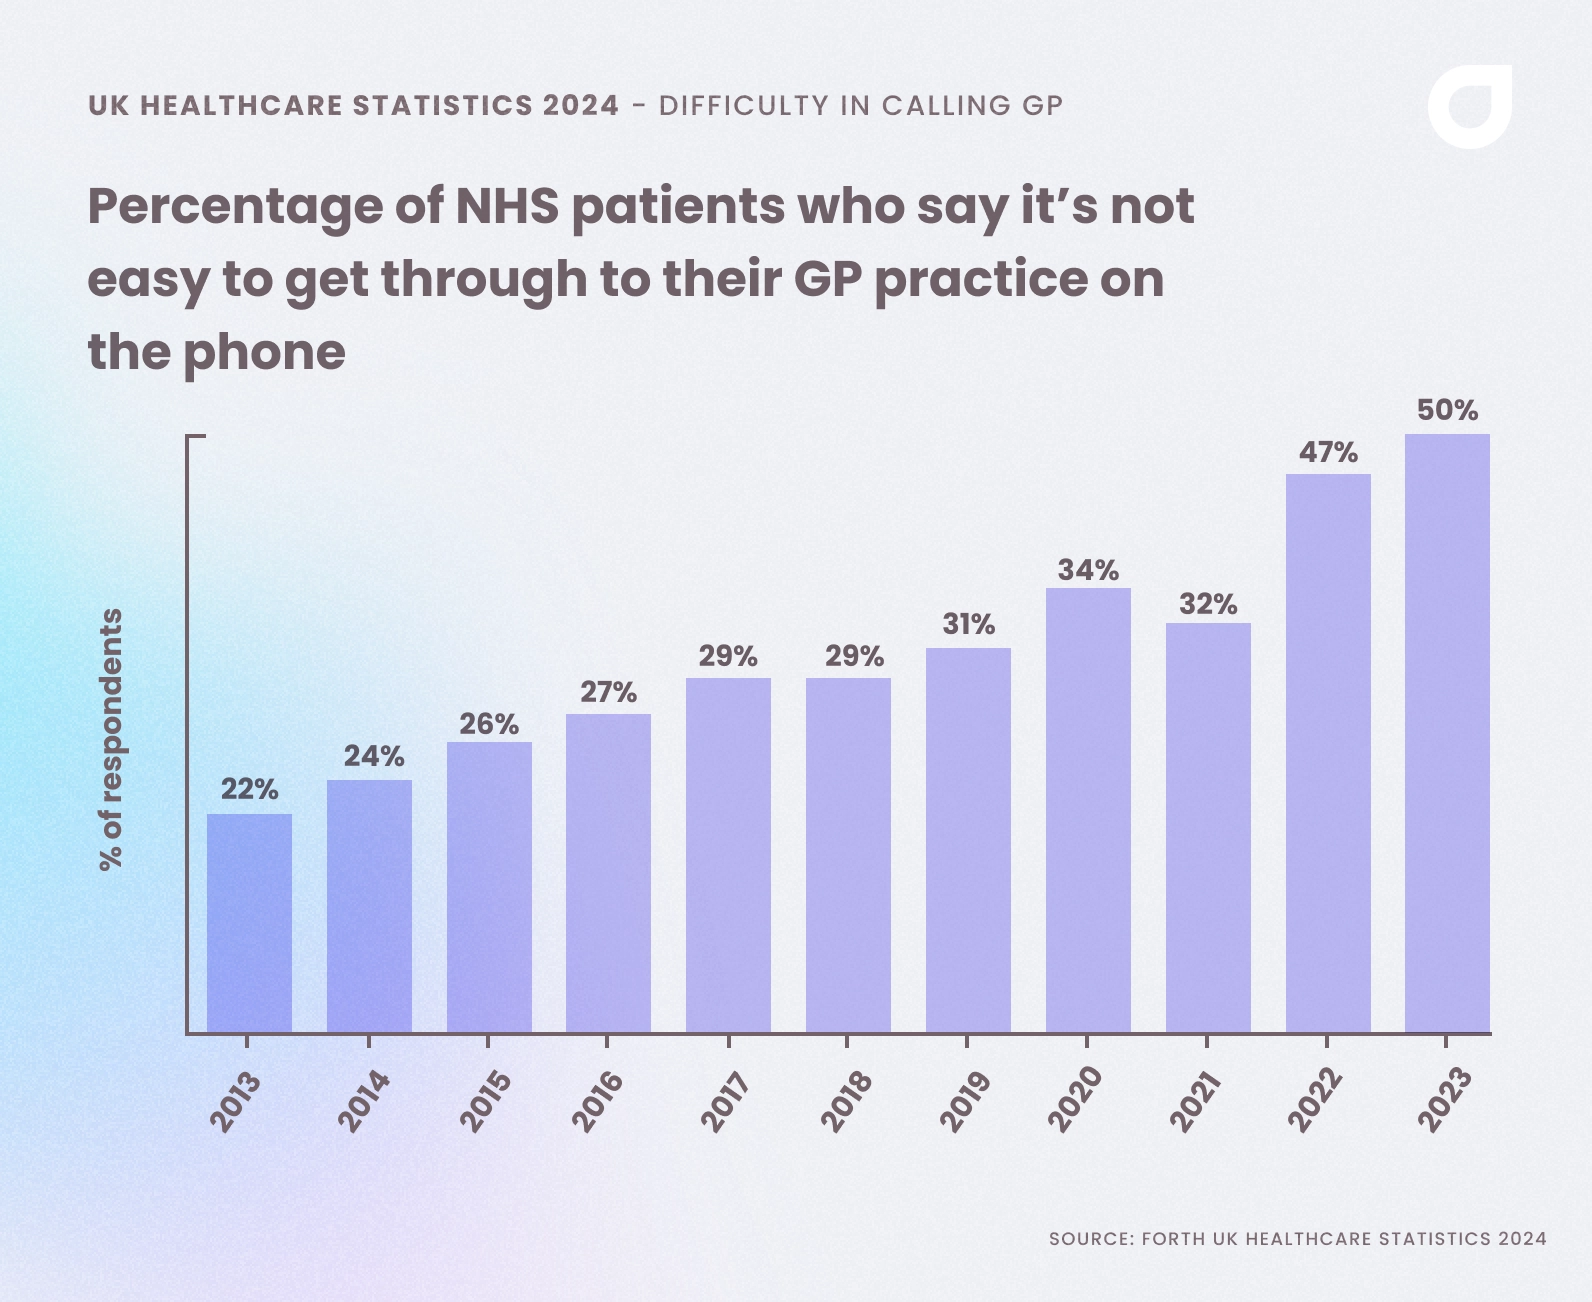 A graph showing the percentage of UK adults who says it's not easy to contact their GP via phone